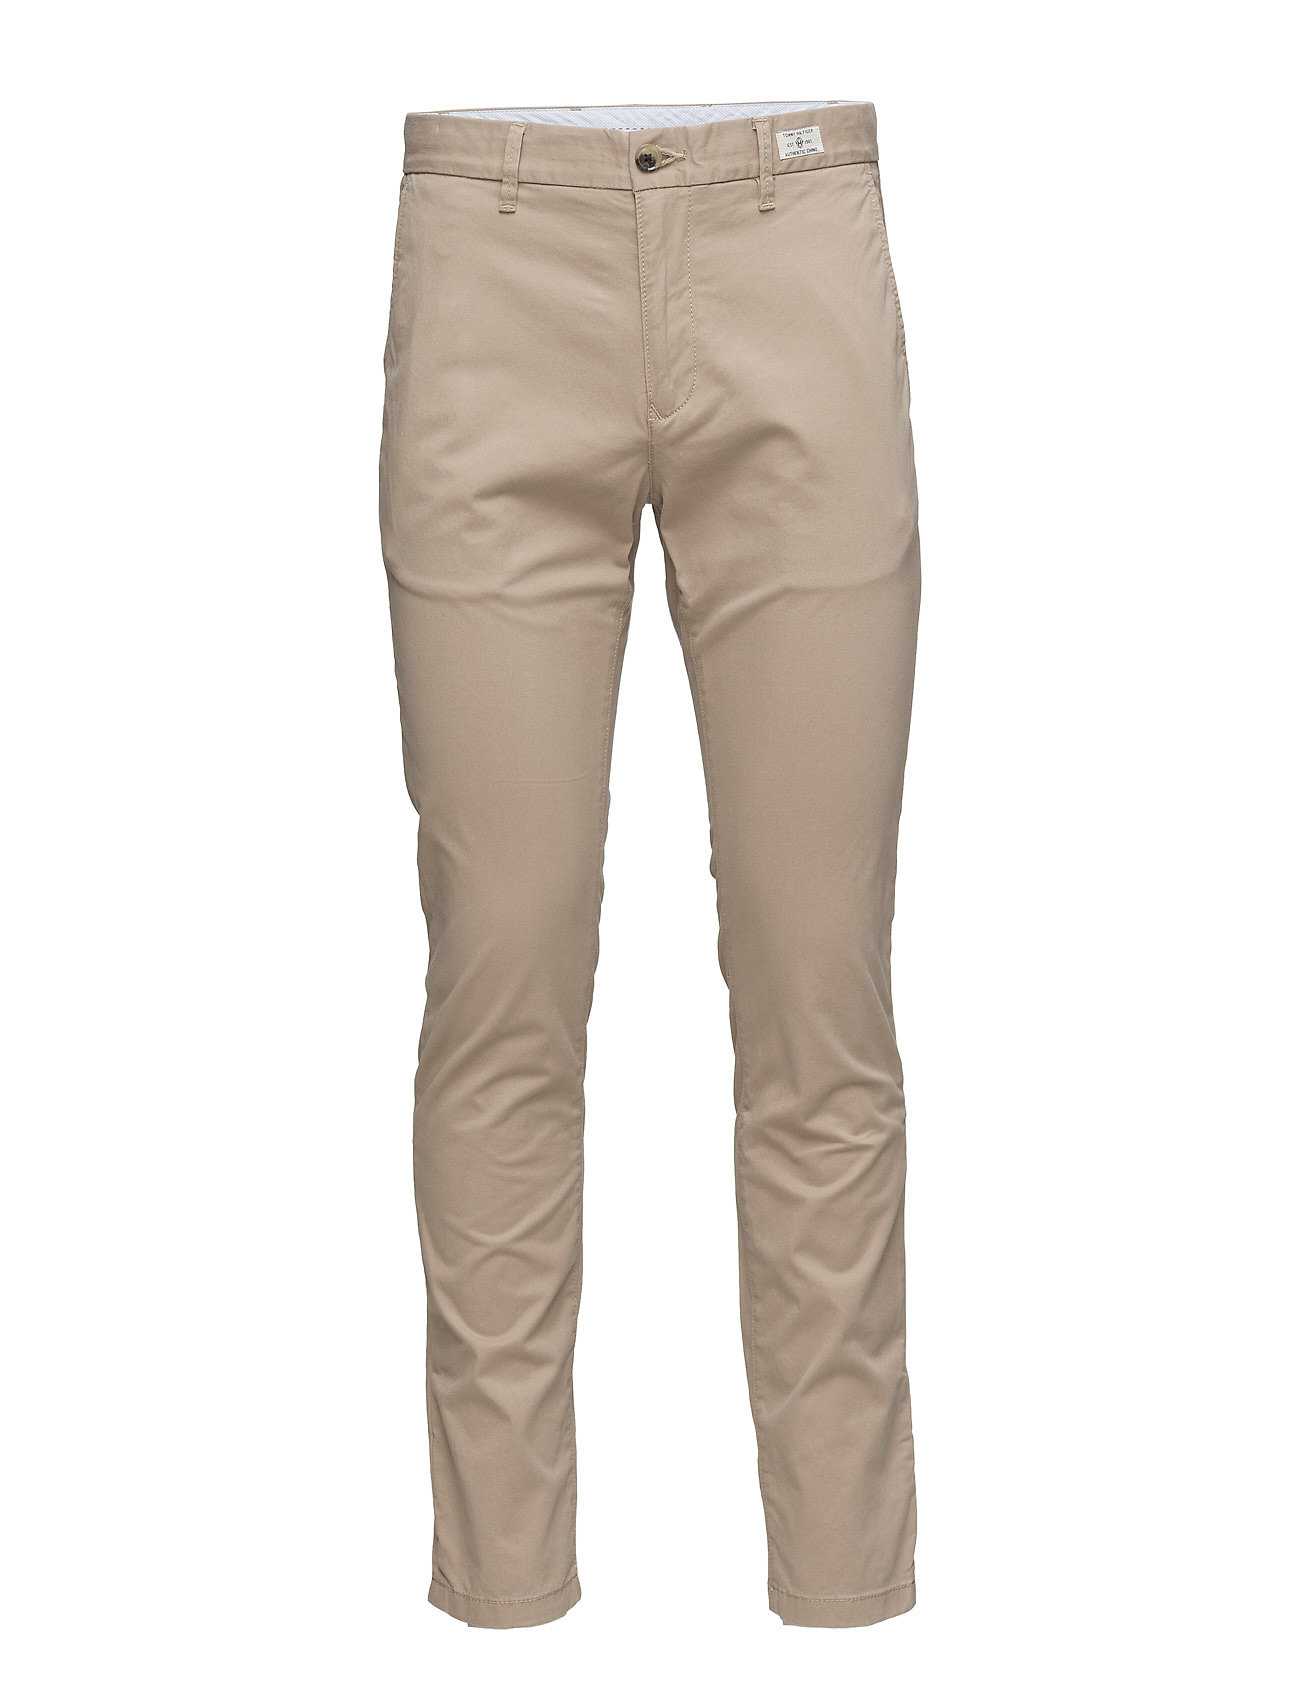 Tommy Hilfiger Mens Core Denton Straight Chino Trouser 